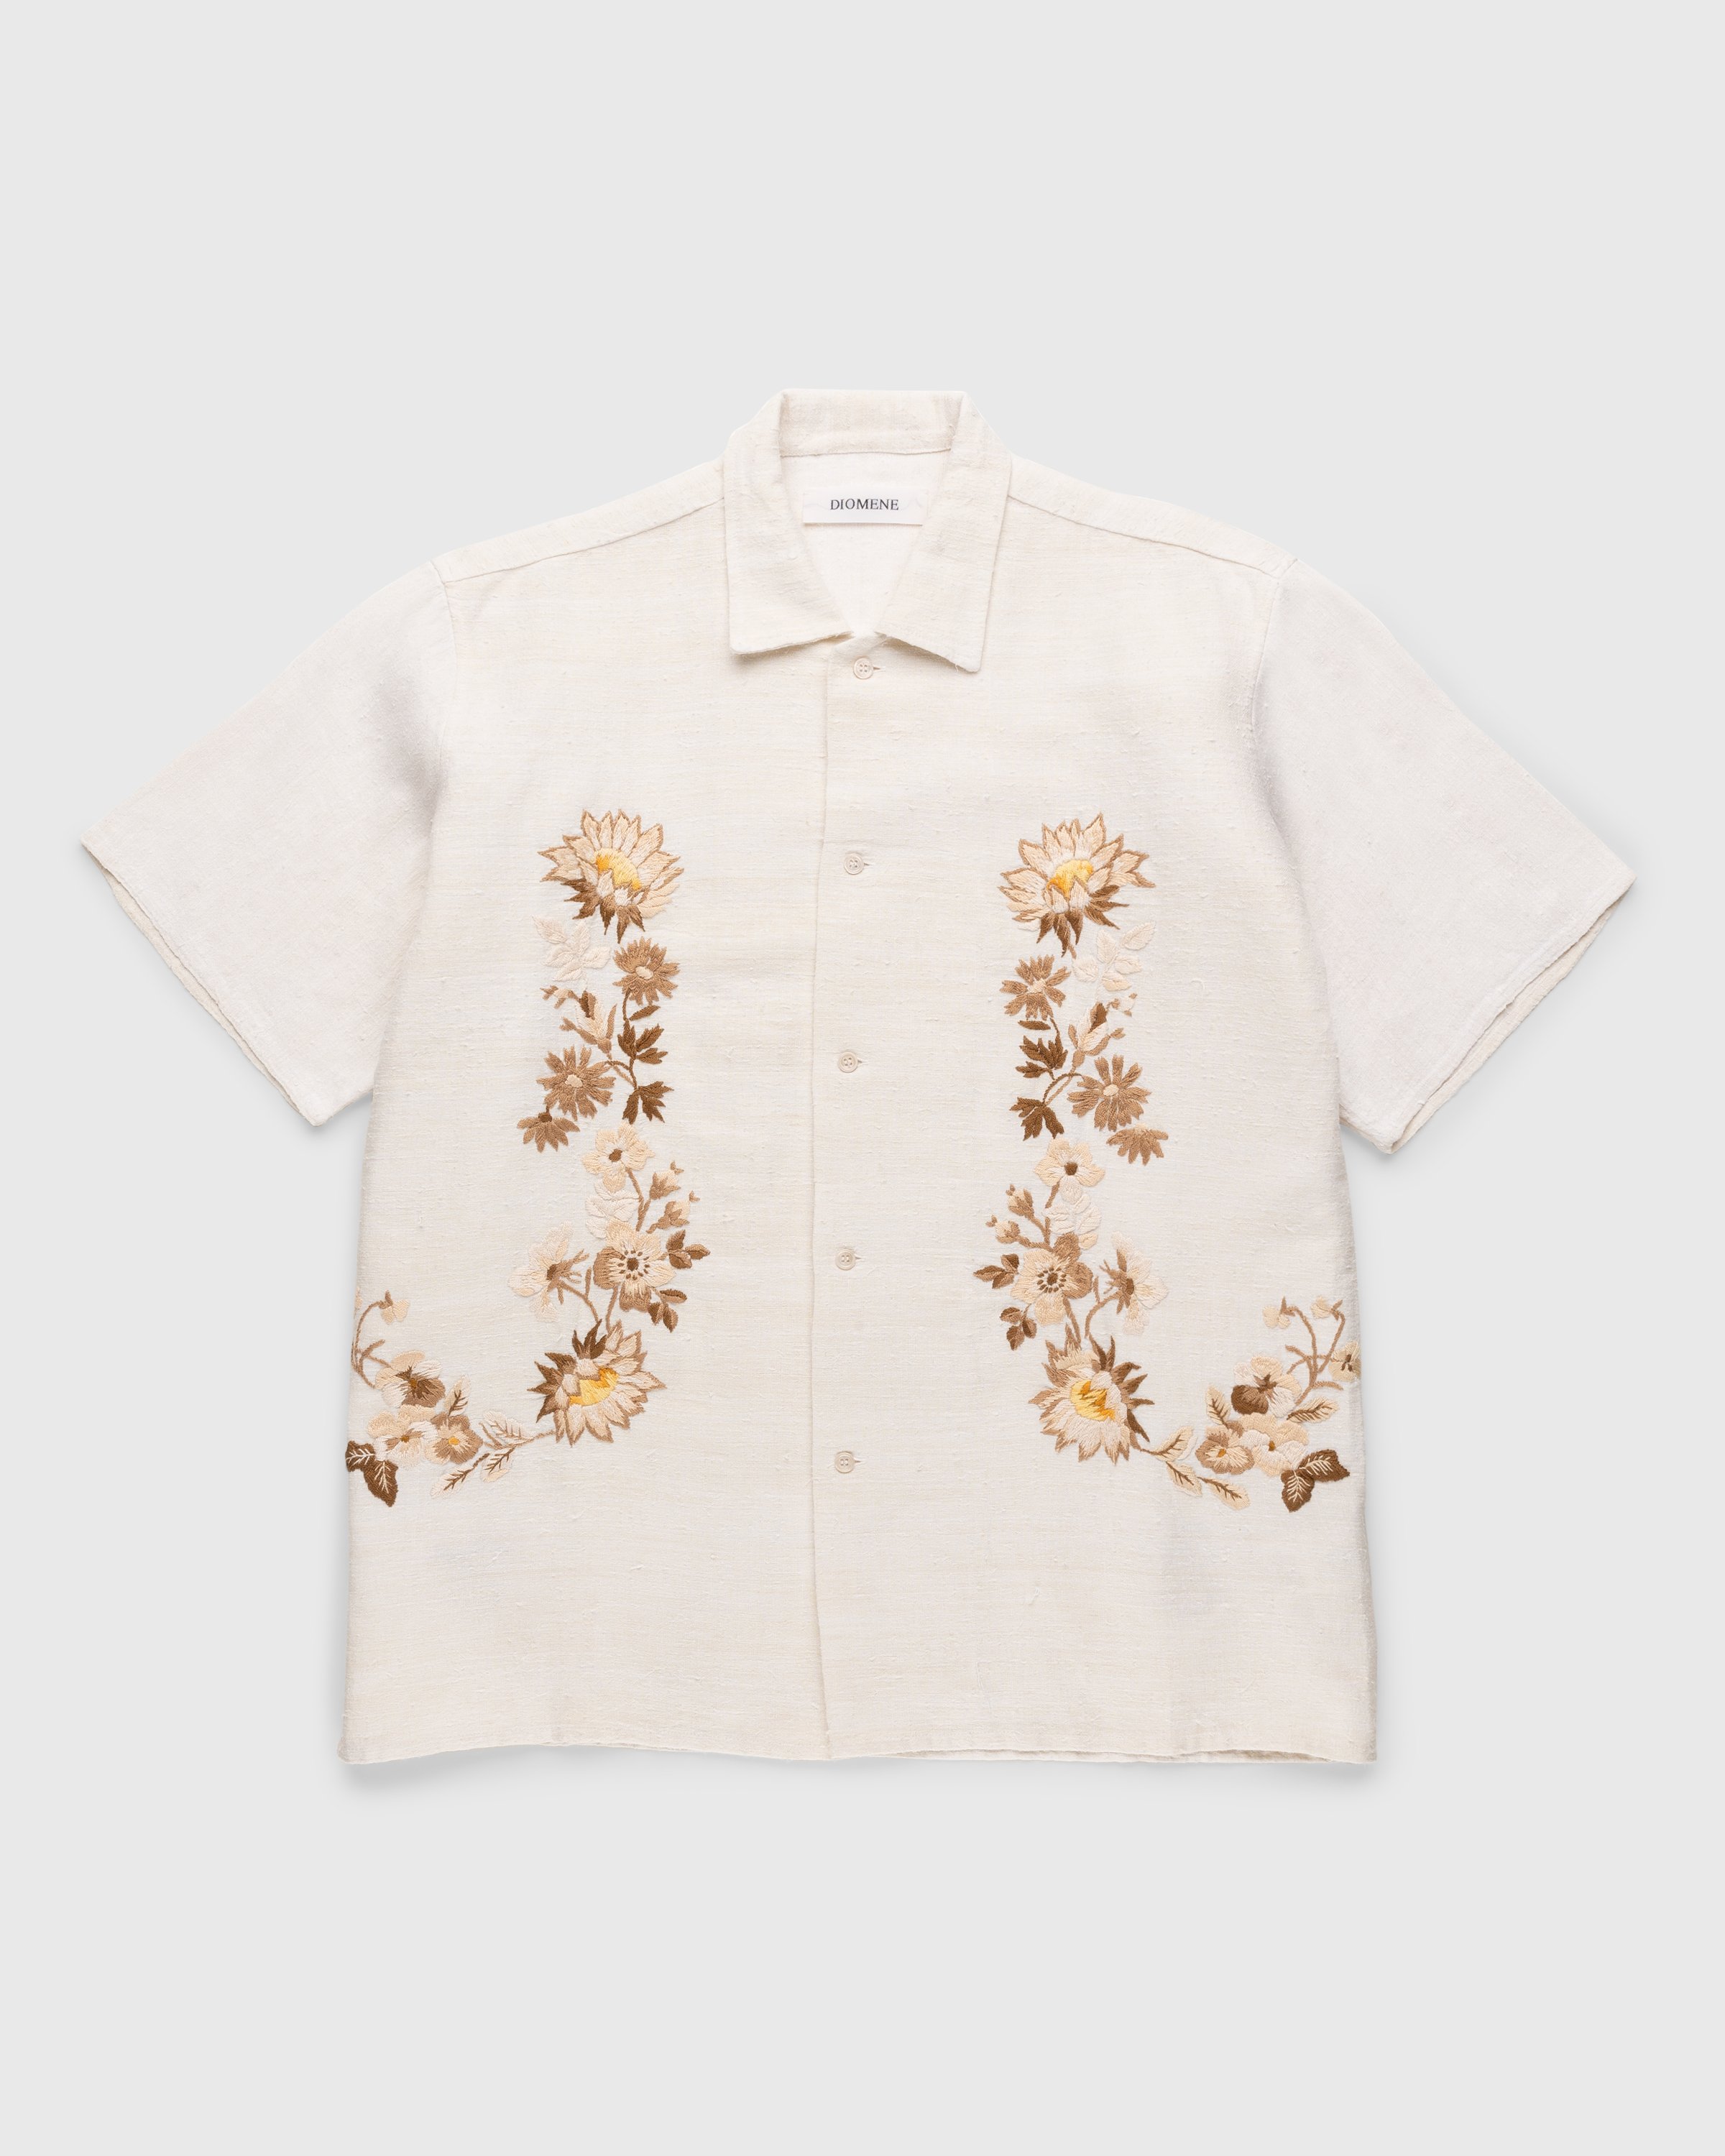 Diomene by Damir Doma - Embroidered Vacation Shirt Cream - Clothing - White - Image 1